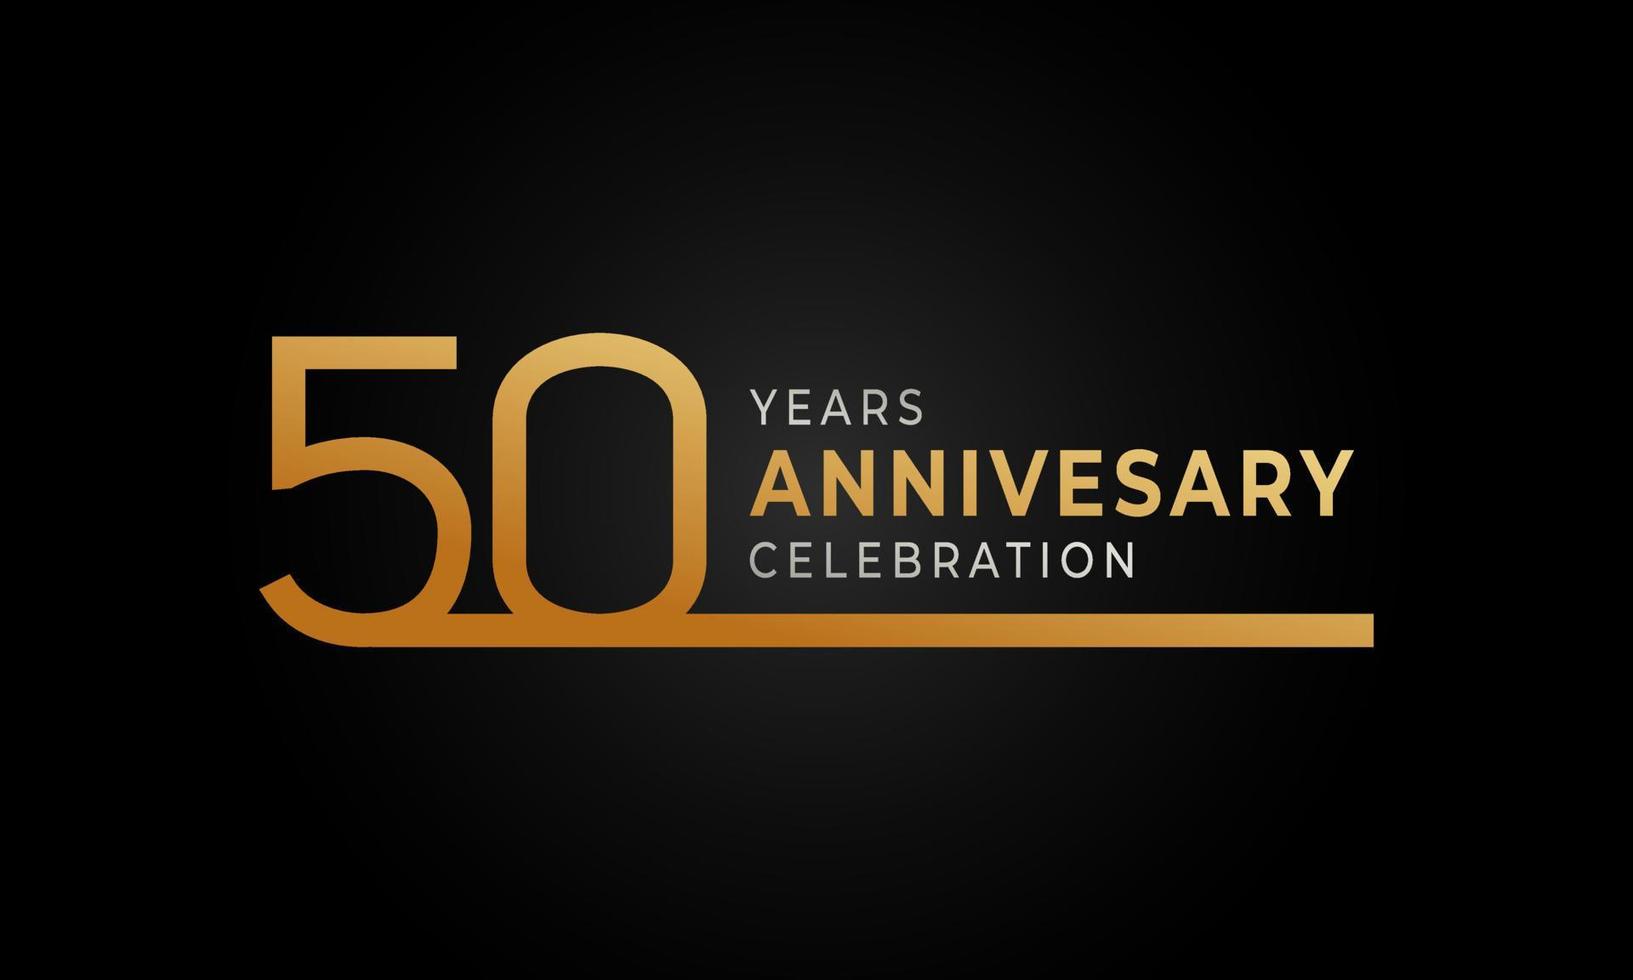 50 Year Anniversary Celebration Logotype with Single Line Golden and Silver Color for Celebration Event, Wedding, Greeting card, and Invitation Isolated on Black Background vector